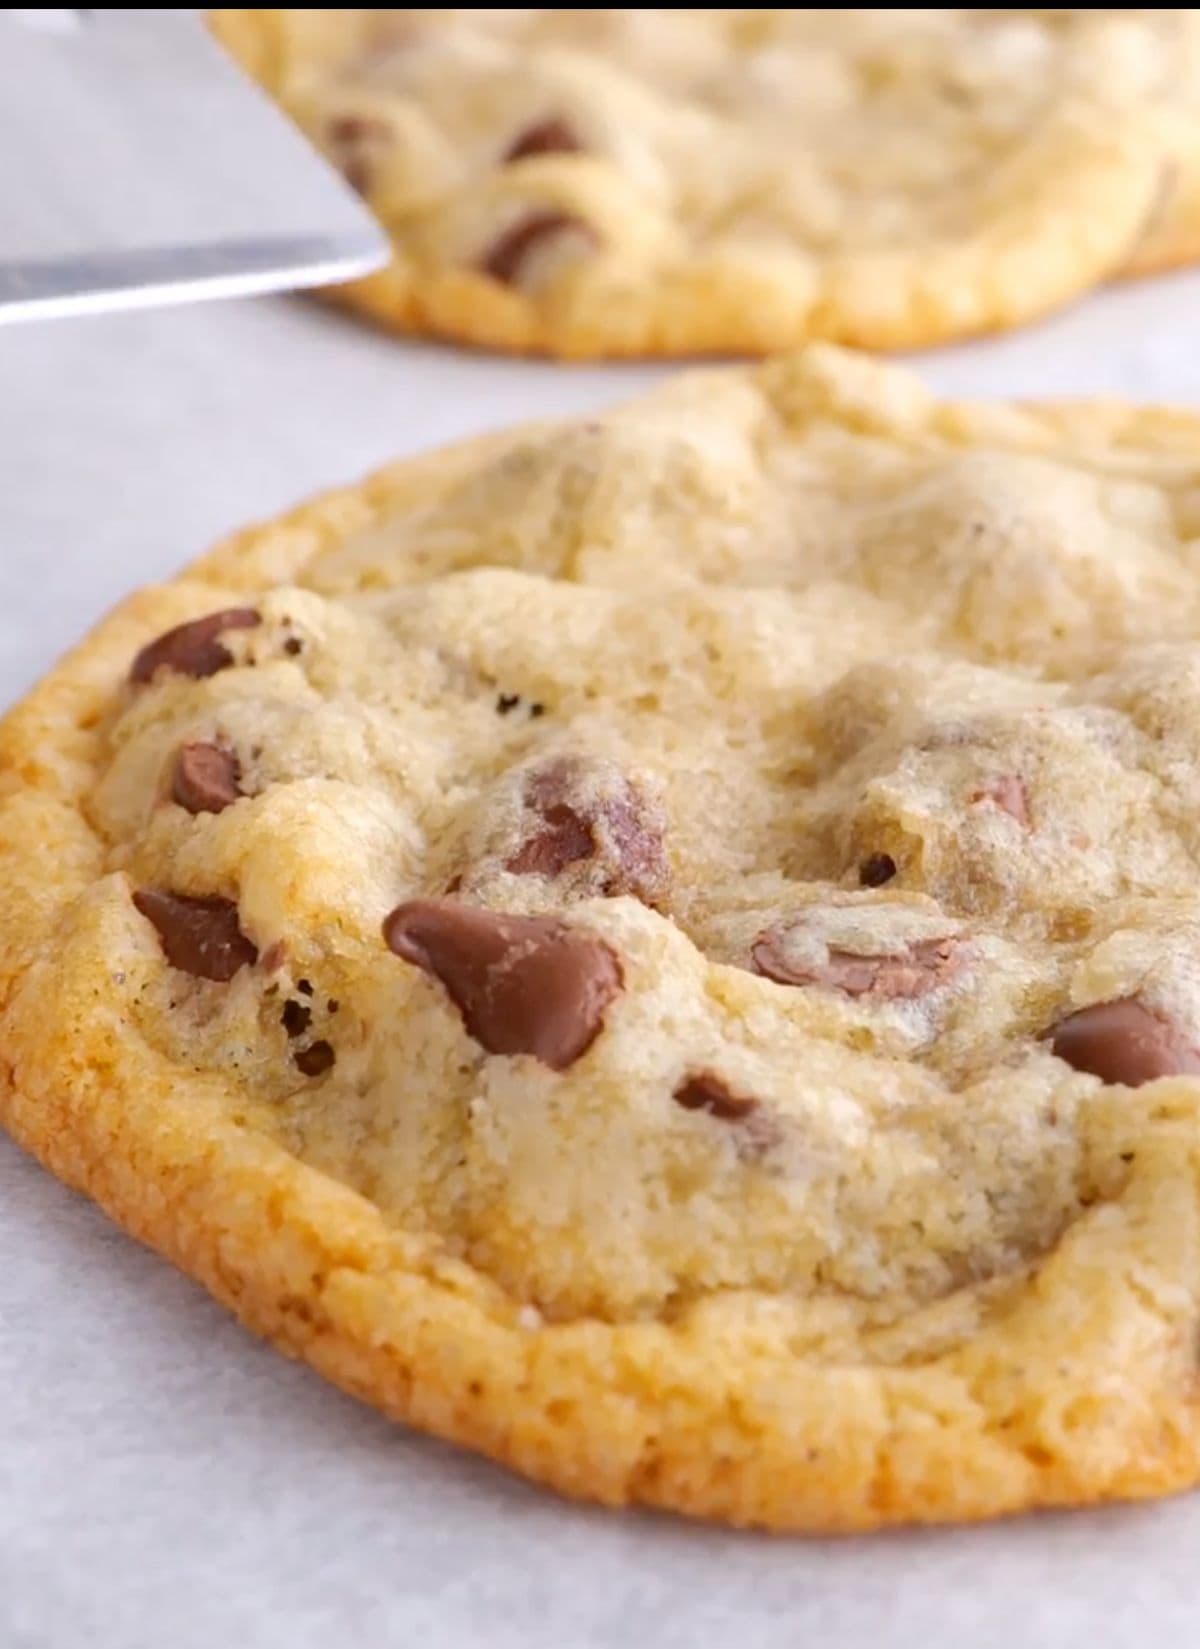 Chocolate Chip Cookies baked on sheet